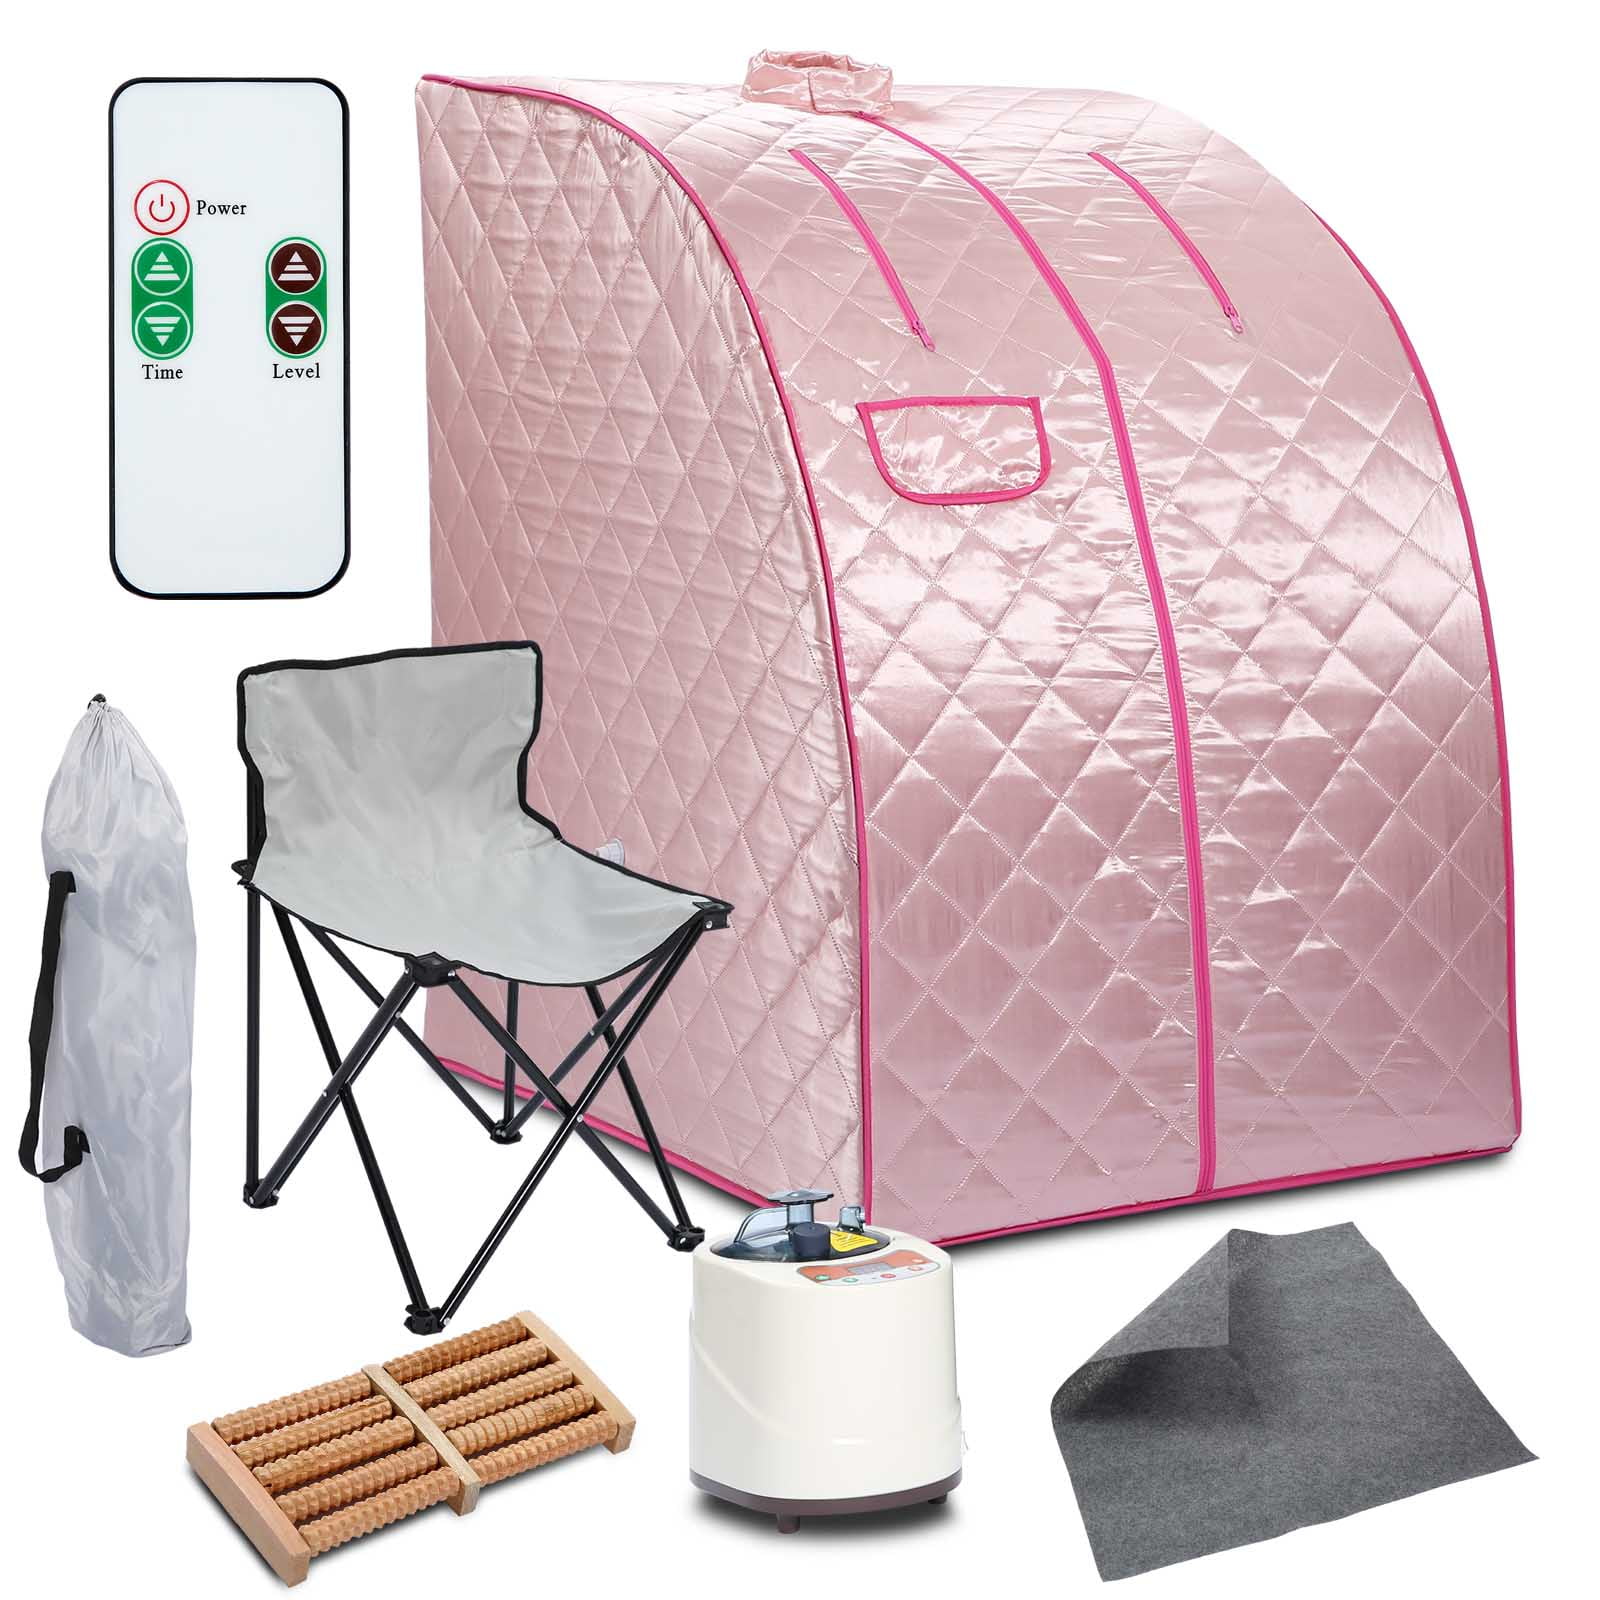 Details about   Portable 2L Steam Sauna Spa Home Tent Pot Machine Slimming Weight Loss Therapys 